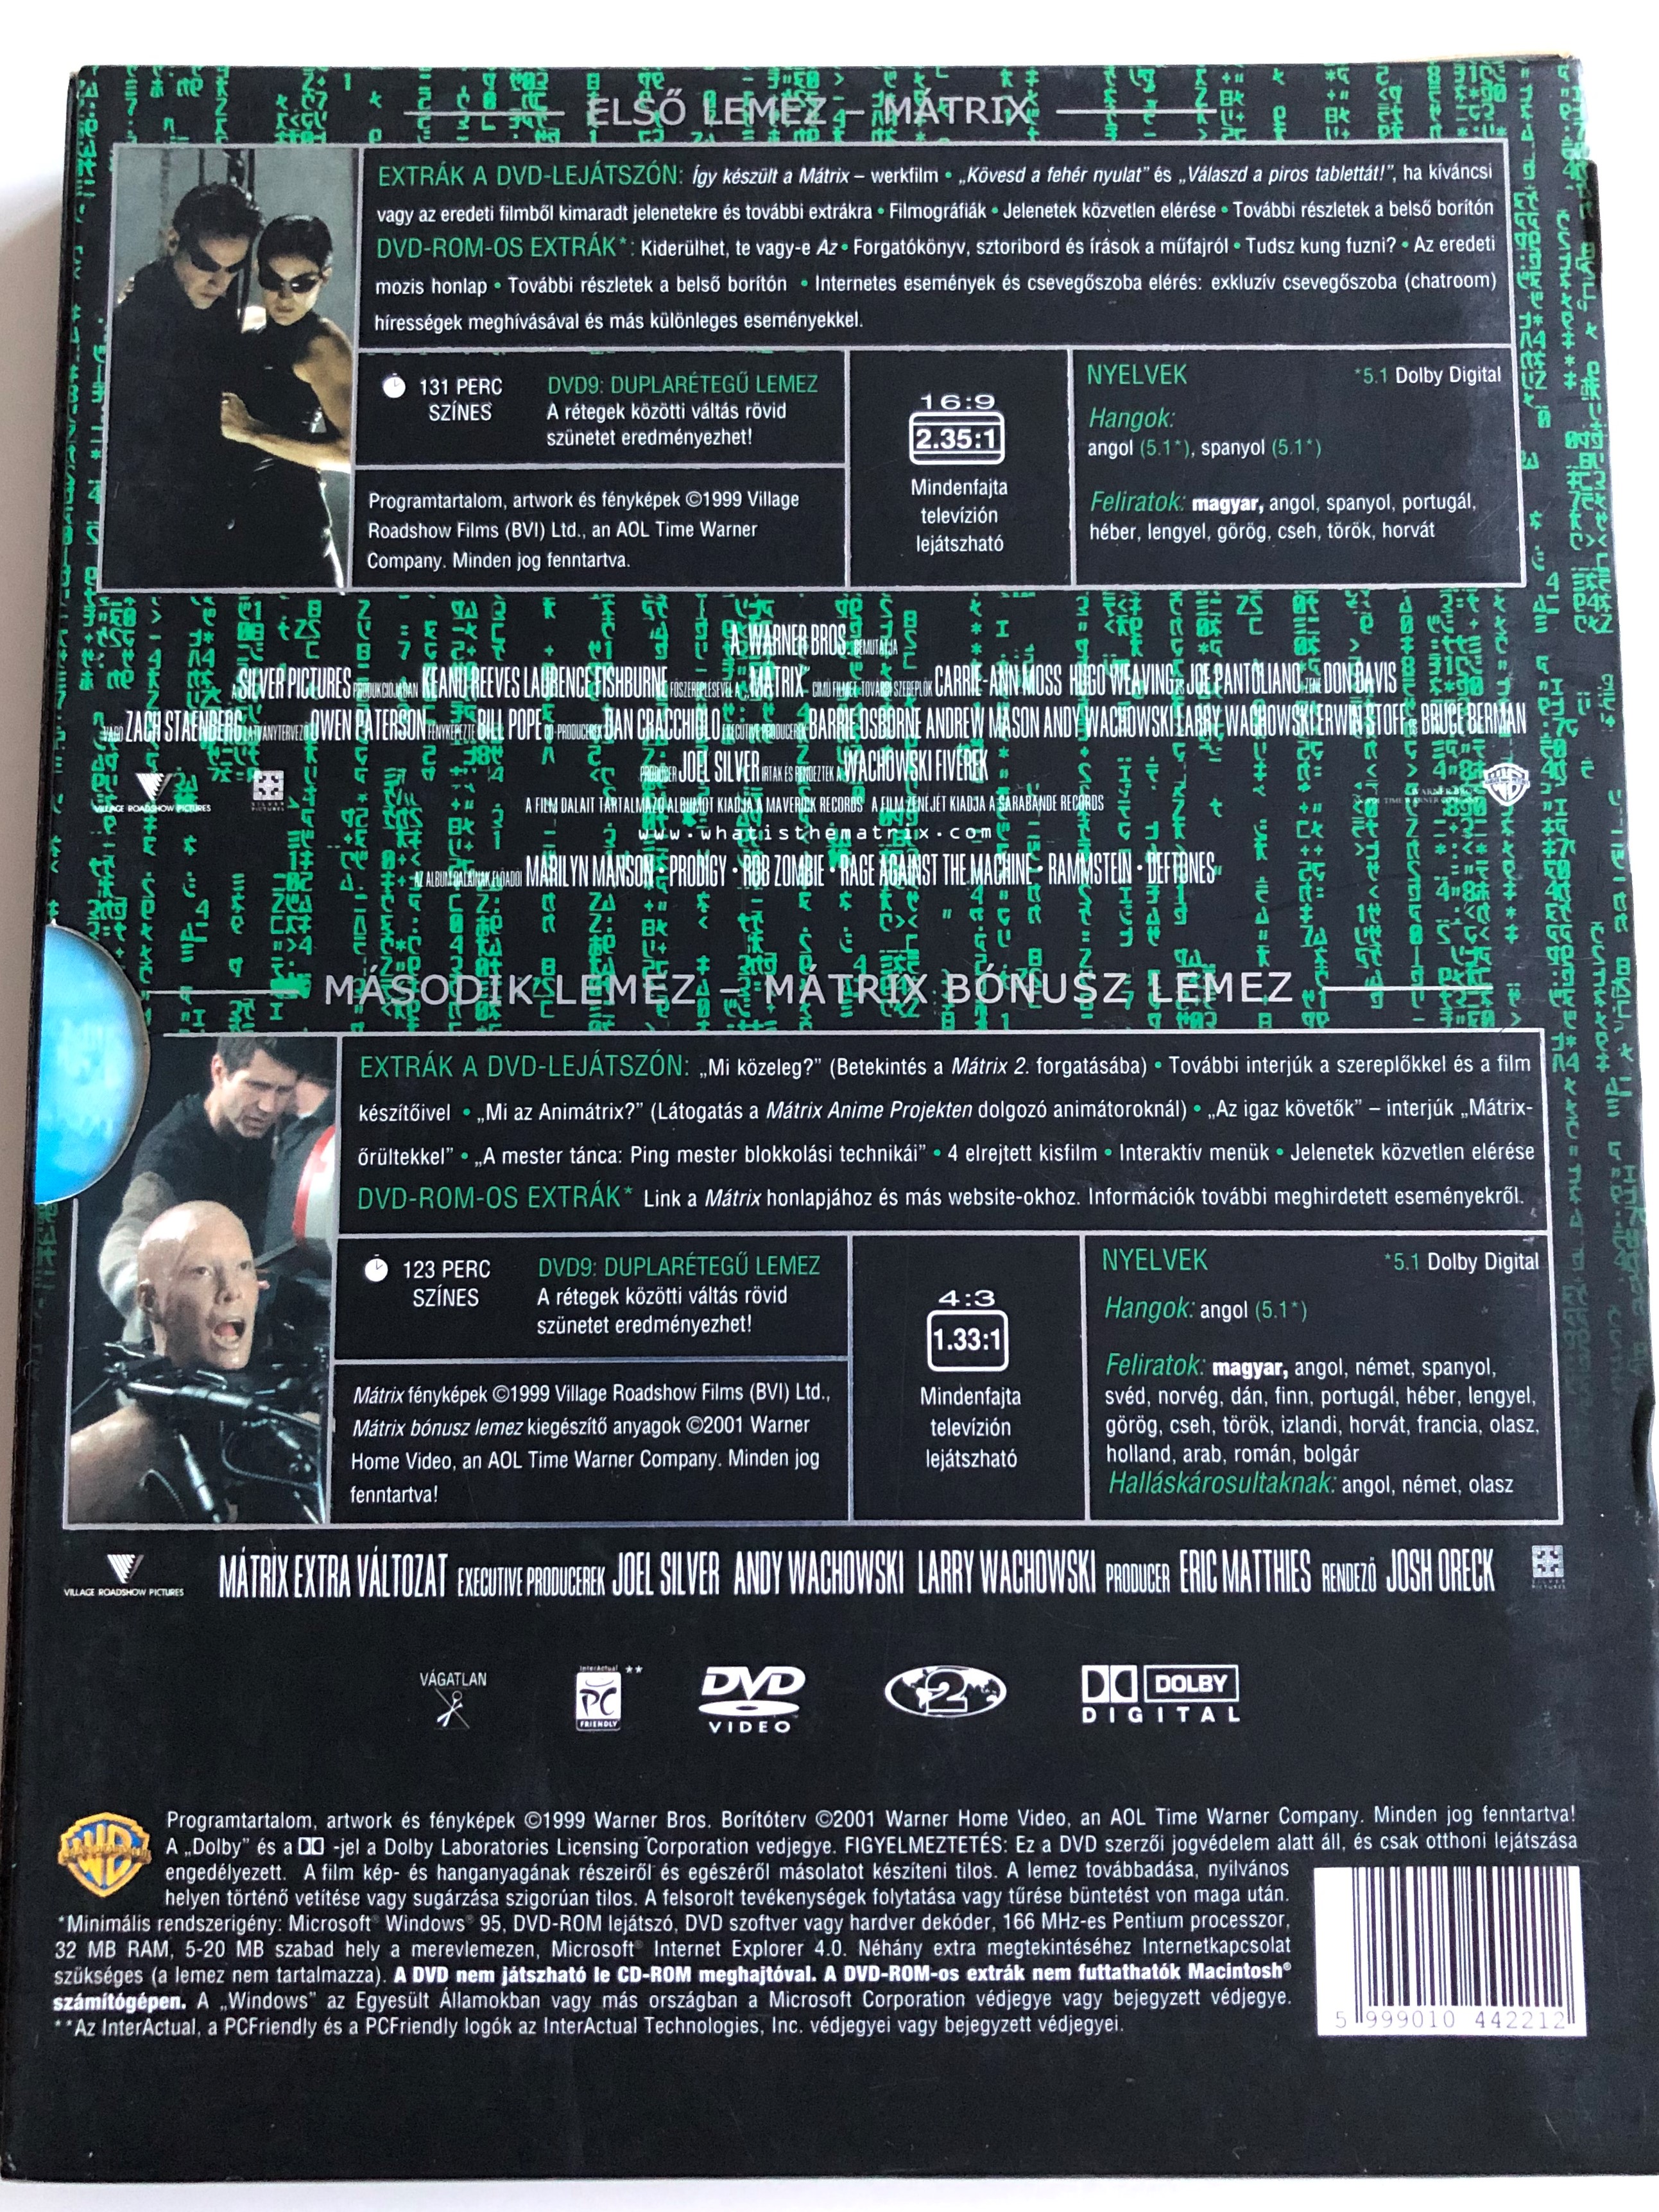 -the-matrix-special-edition-2dvd-1999-m-trix-extra-v-ltozat-directed-by-the-wachowskis-starring-keanu-reeves-laurence-fishbourne-carrie-anne-moss-2-.jpg